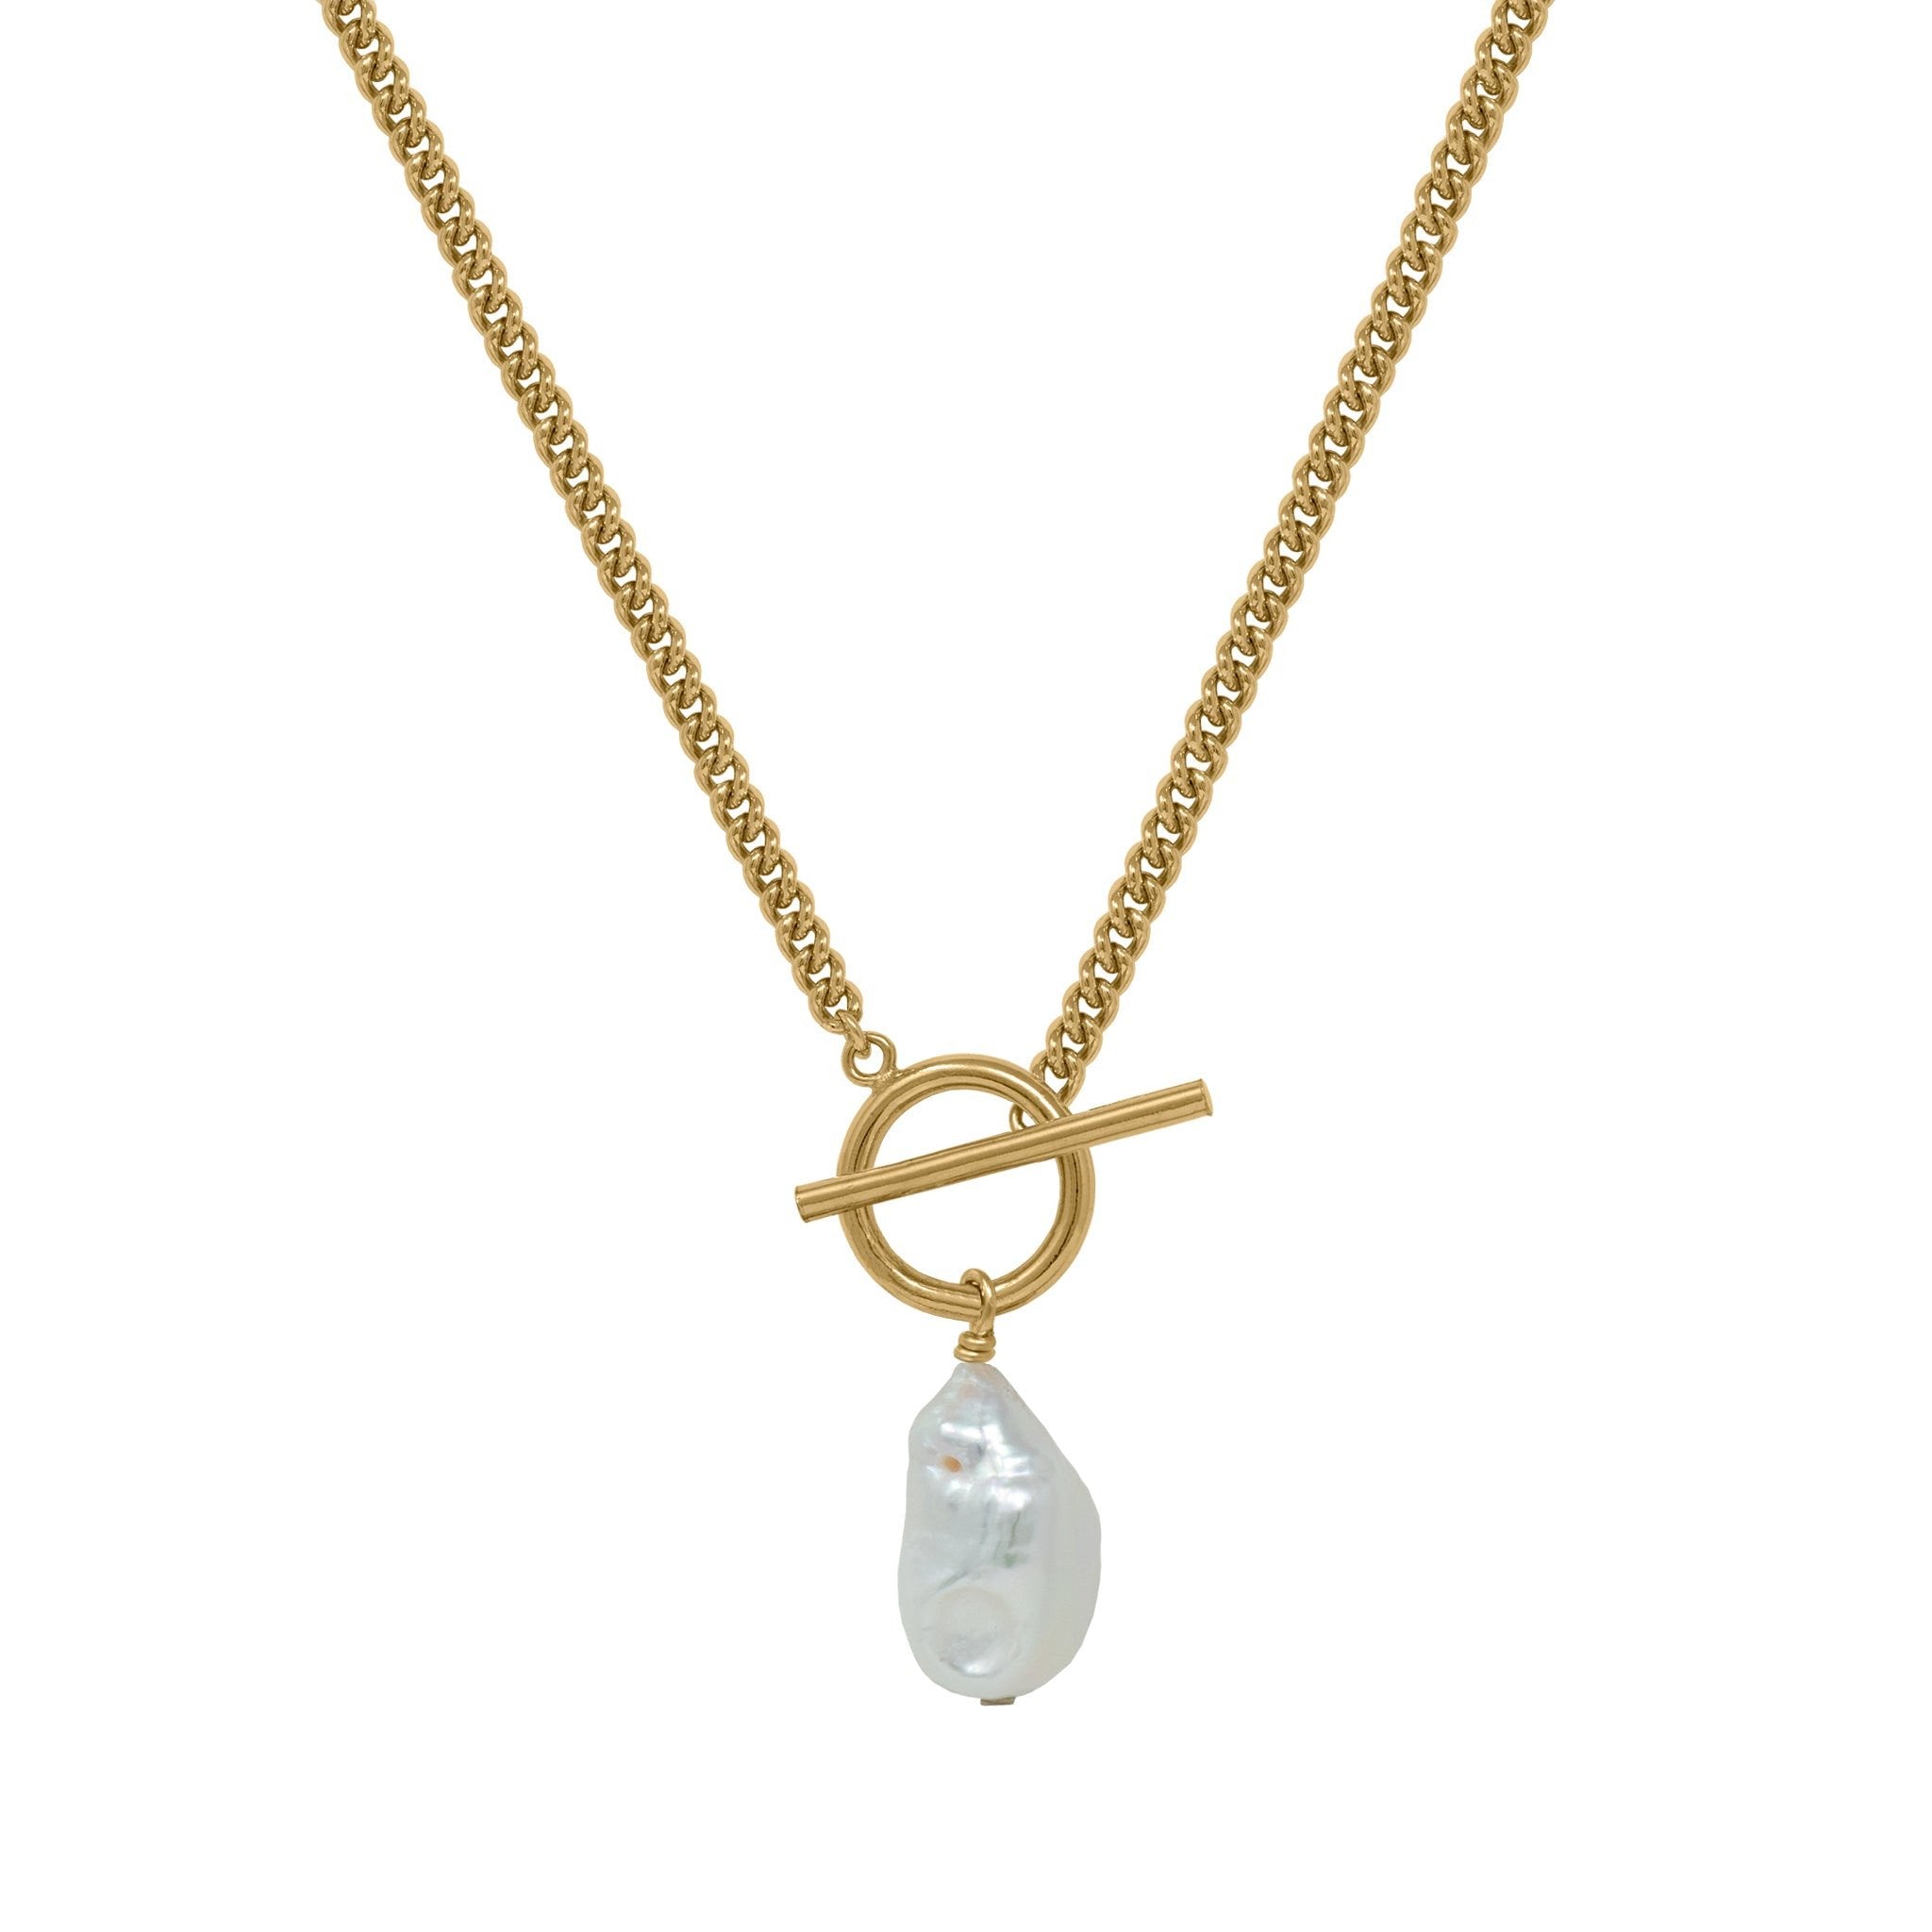 curb chain toggle necklace with a pearl. 